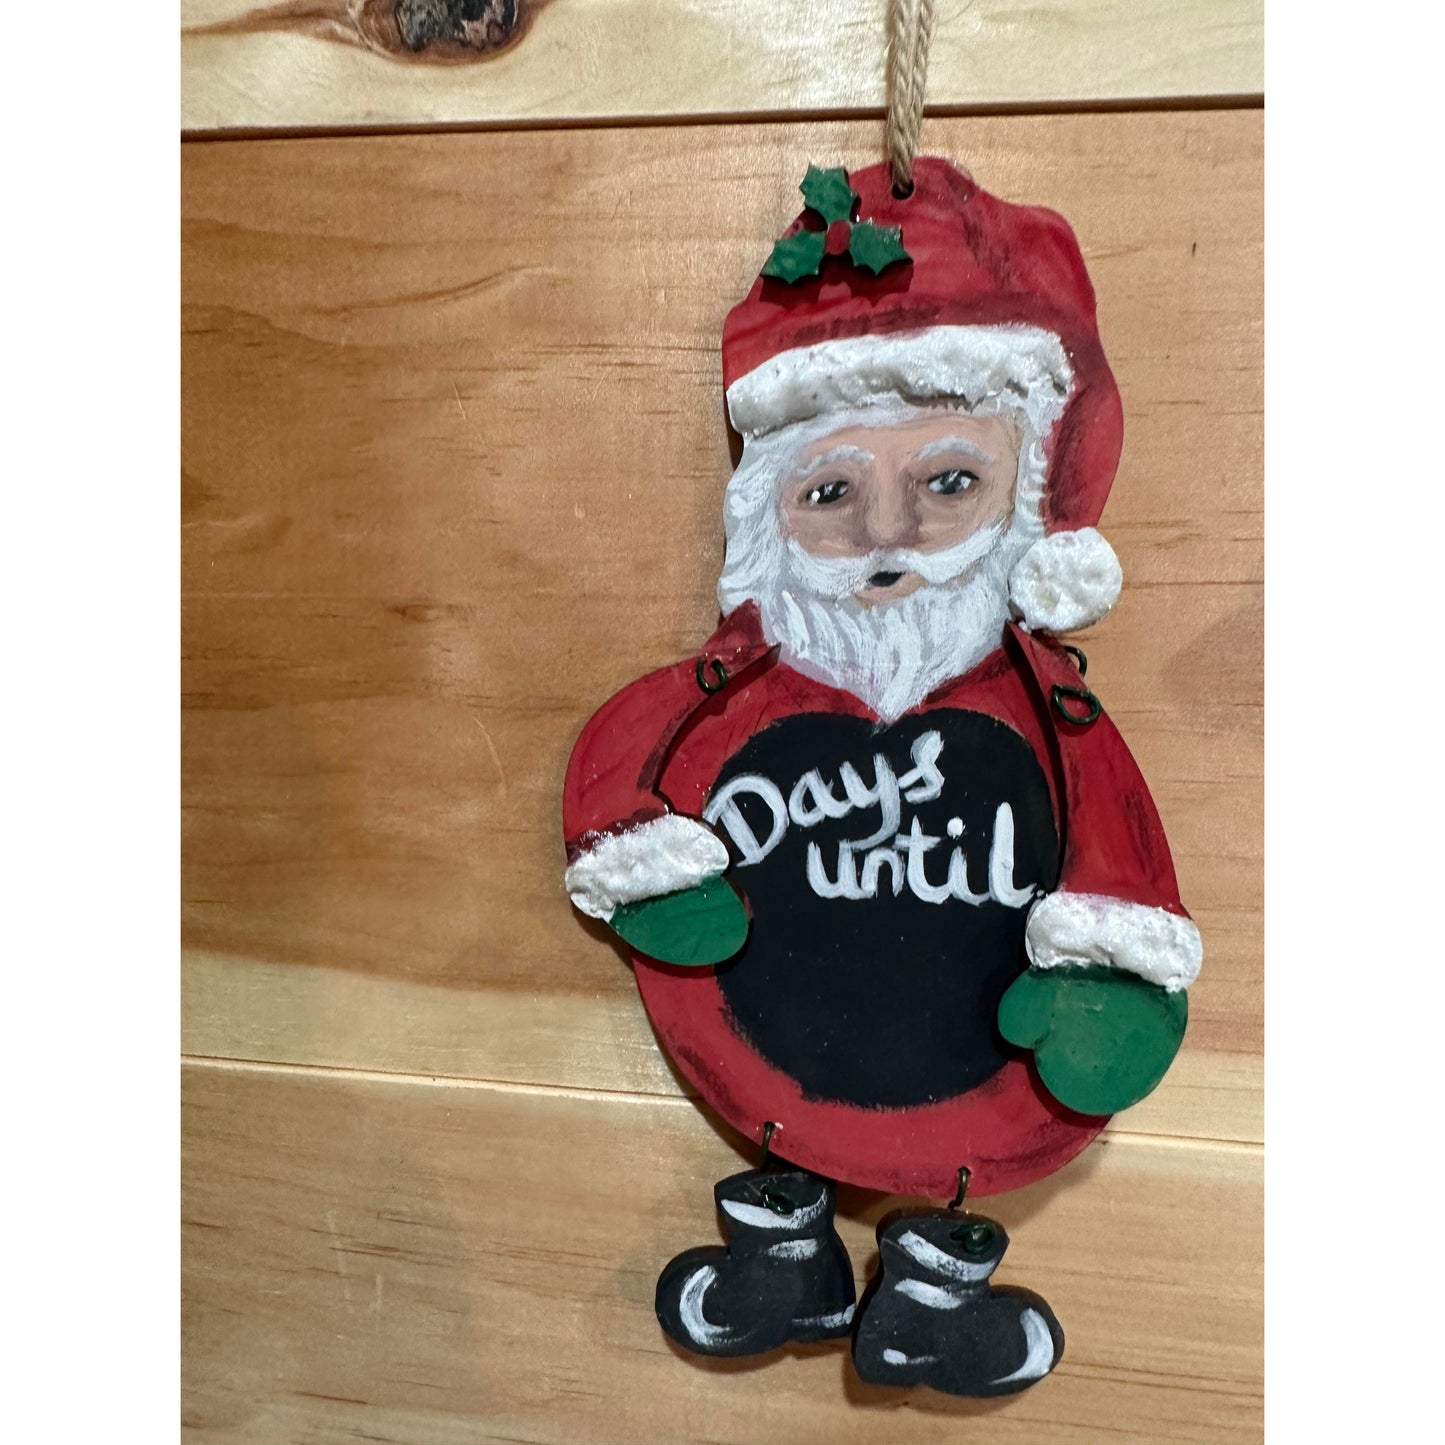 MDF Ornament Countdown Santa 4 x 6-3/4" x 1/8" - Unfinished, Predrilled hole for hanger.